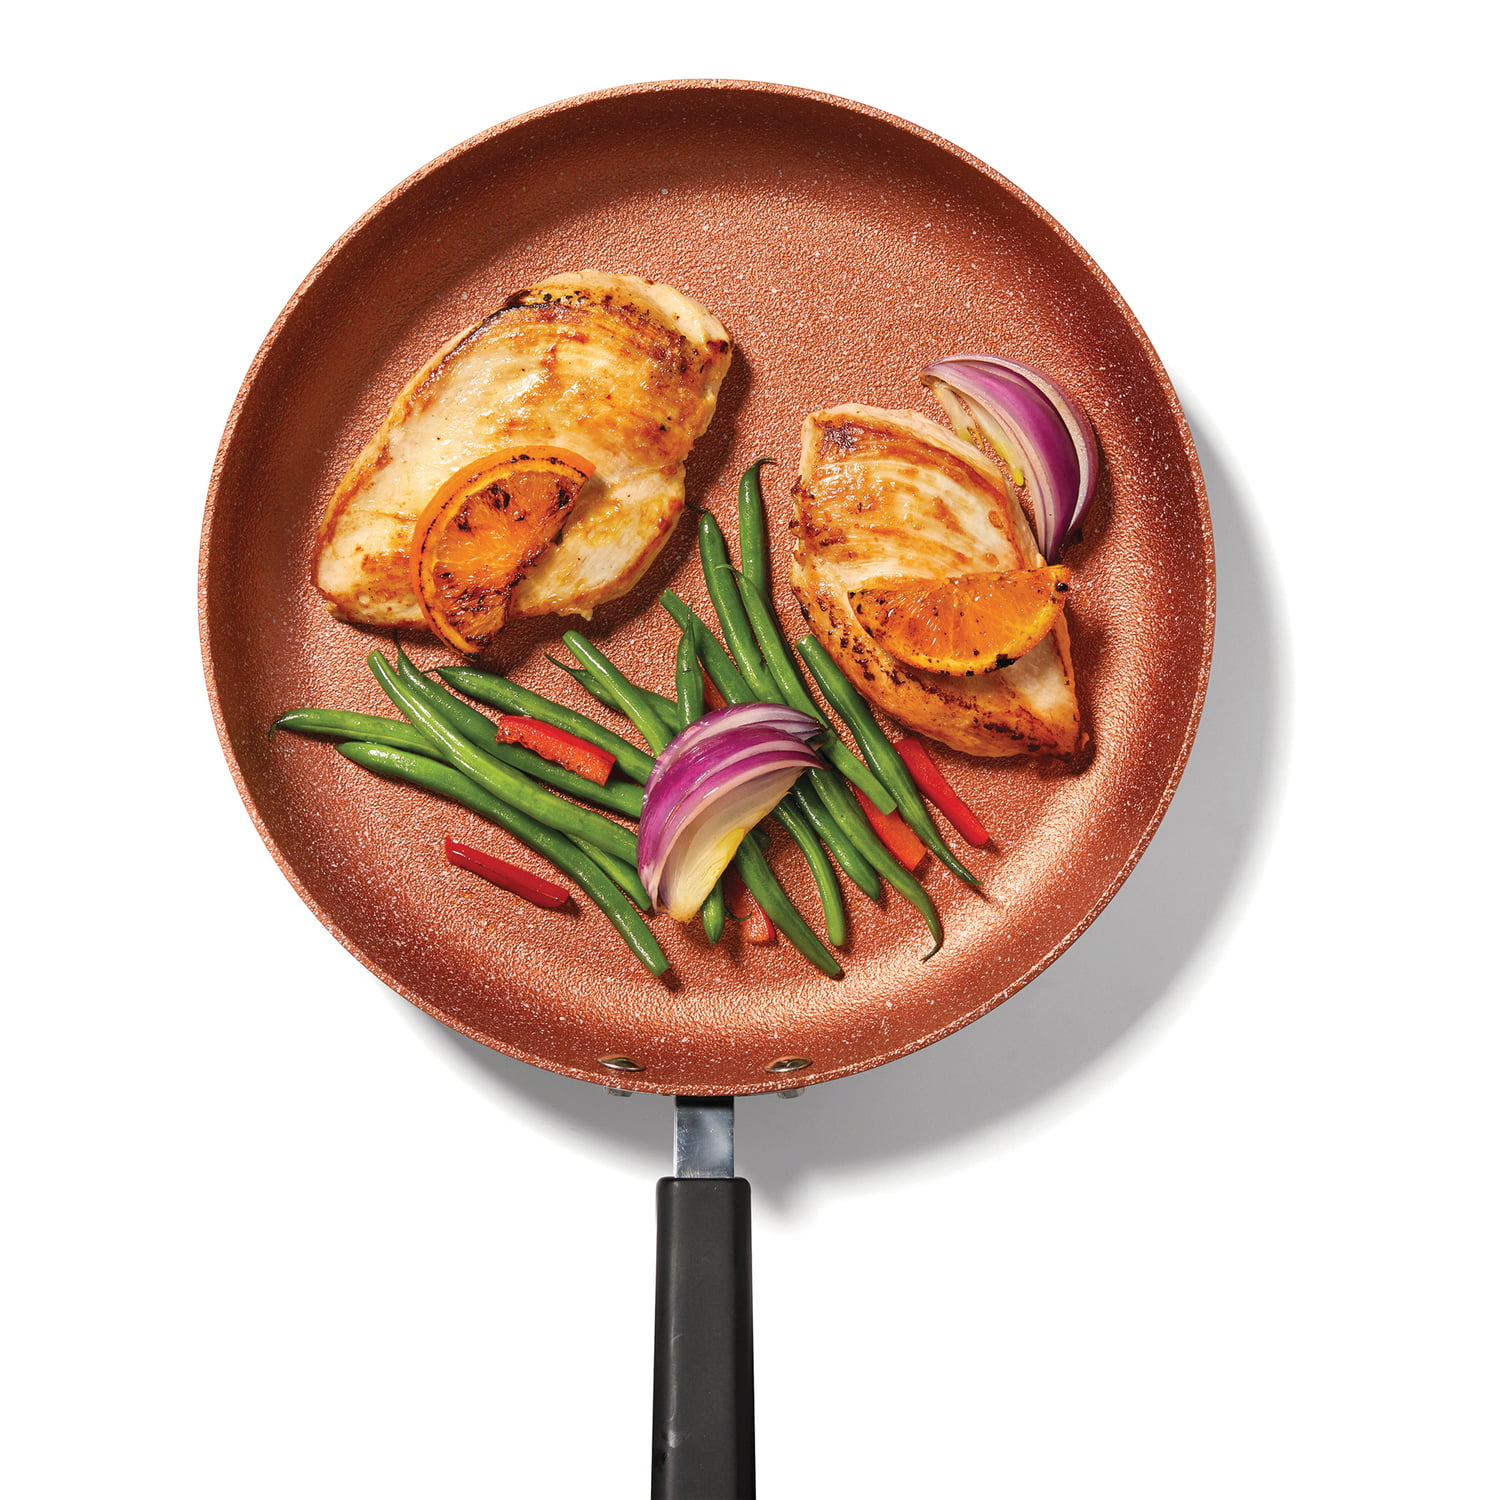 Copper Frying Pan with Lid – Hawkins New York